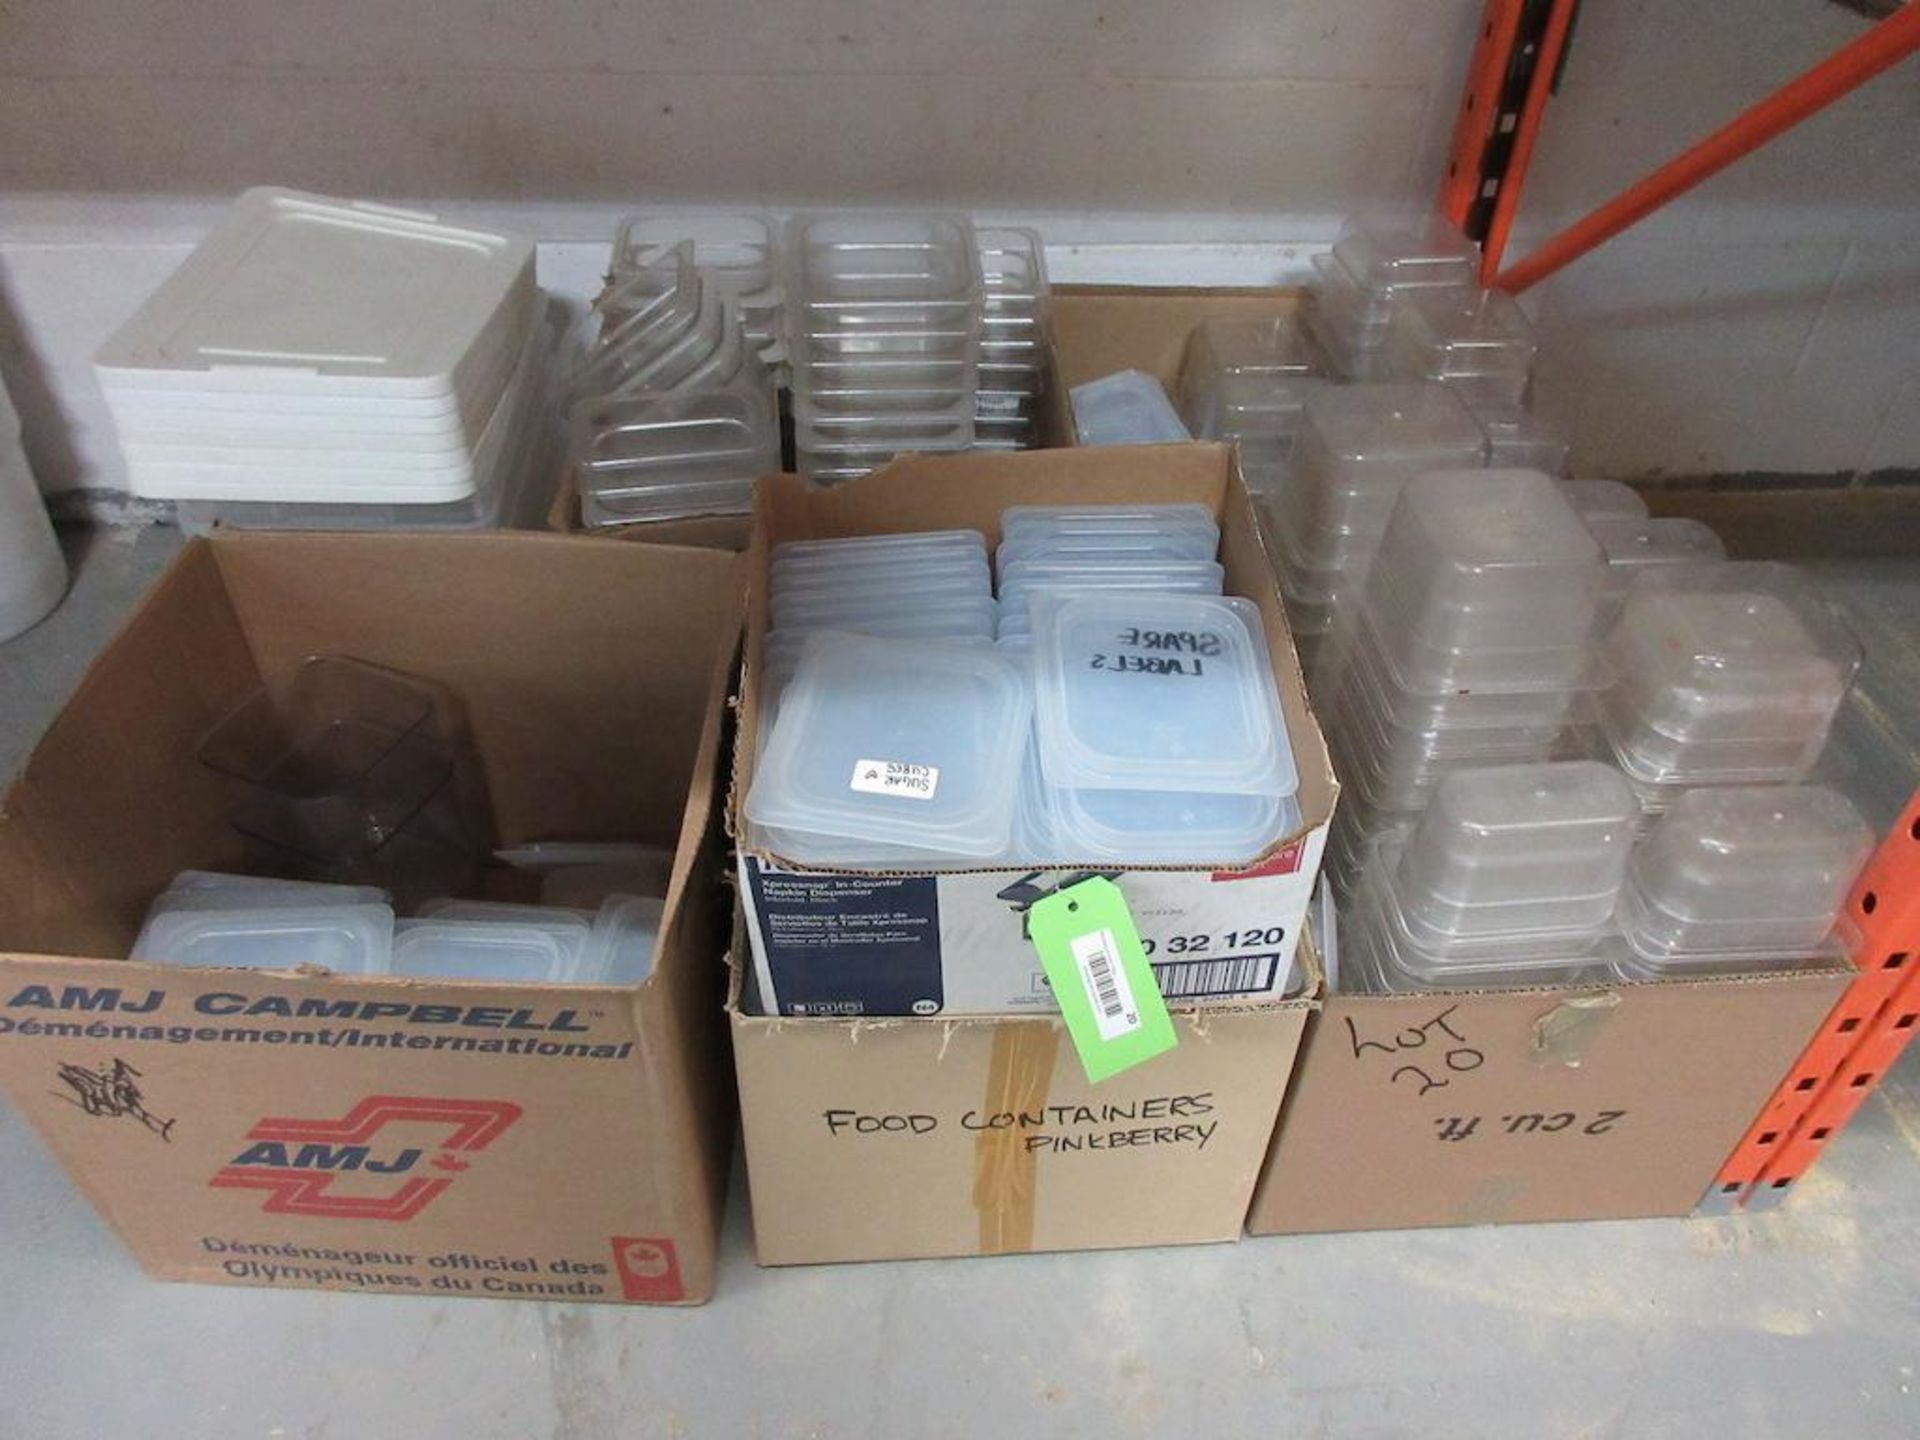 Lot 5 boxes: asst. plastic inserts, containers, lids